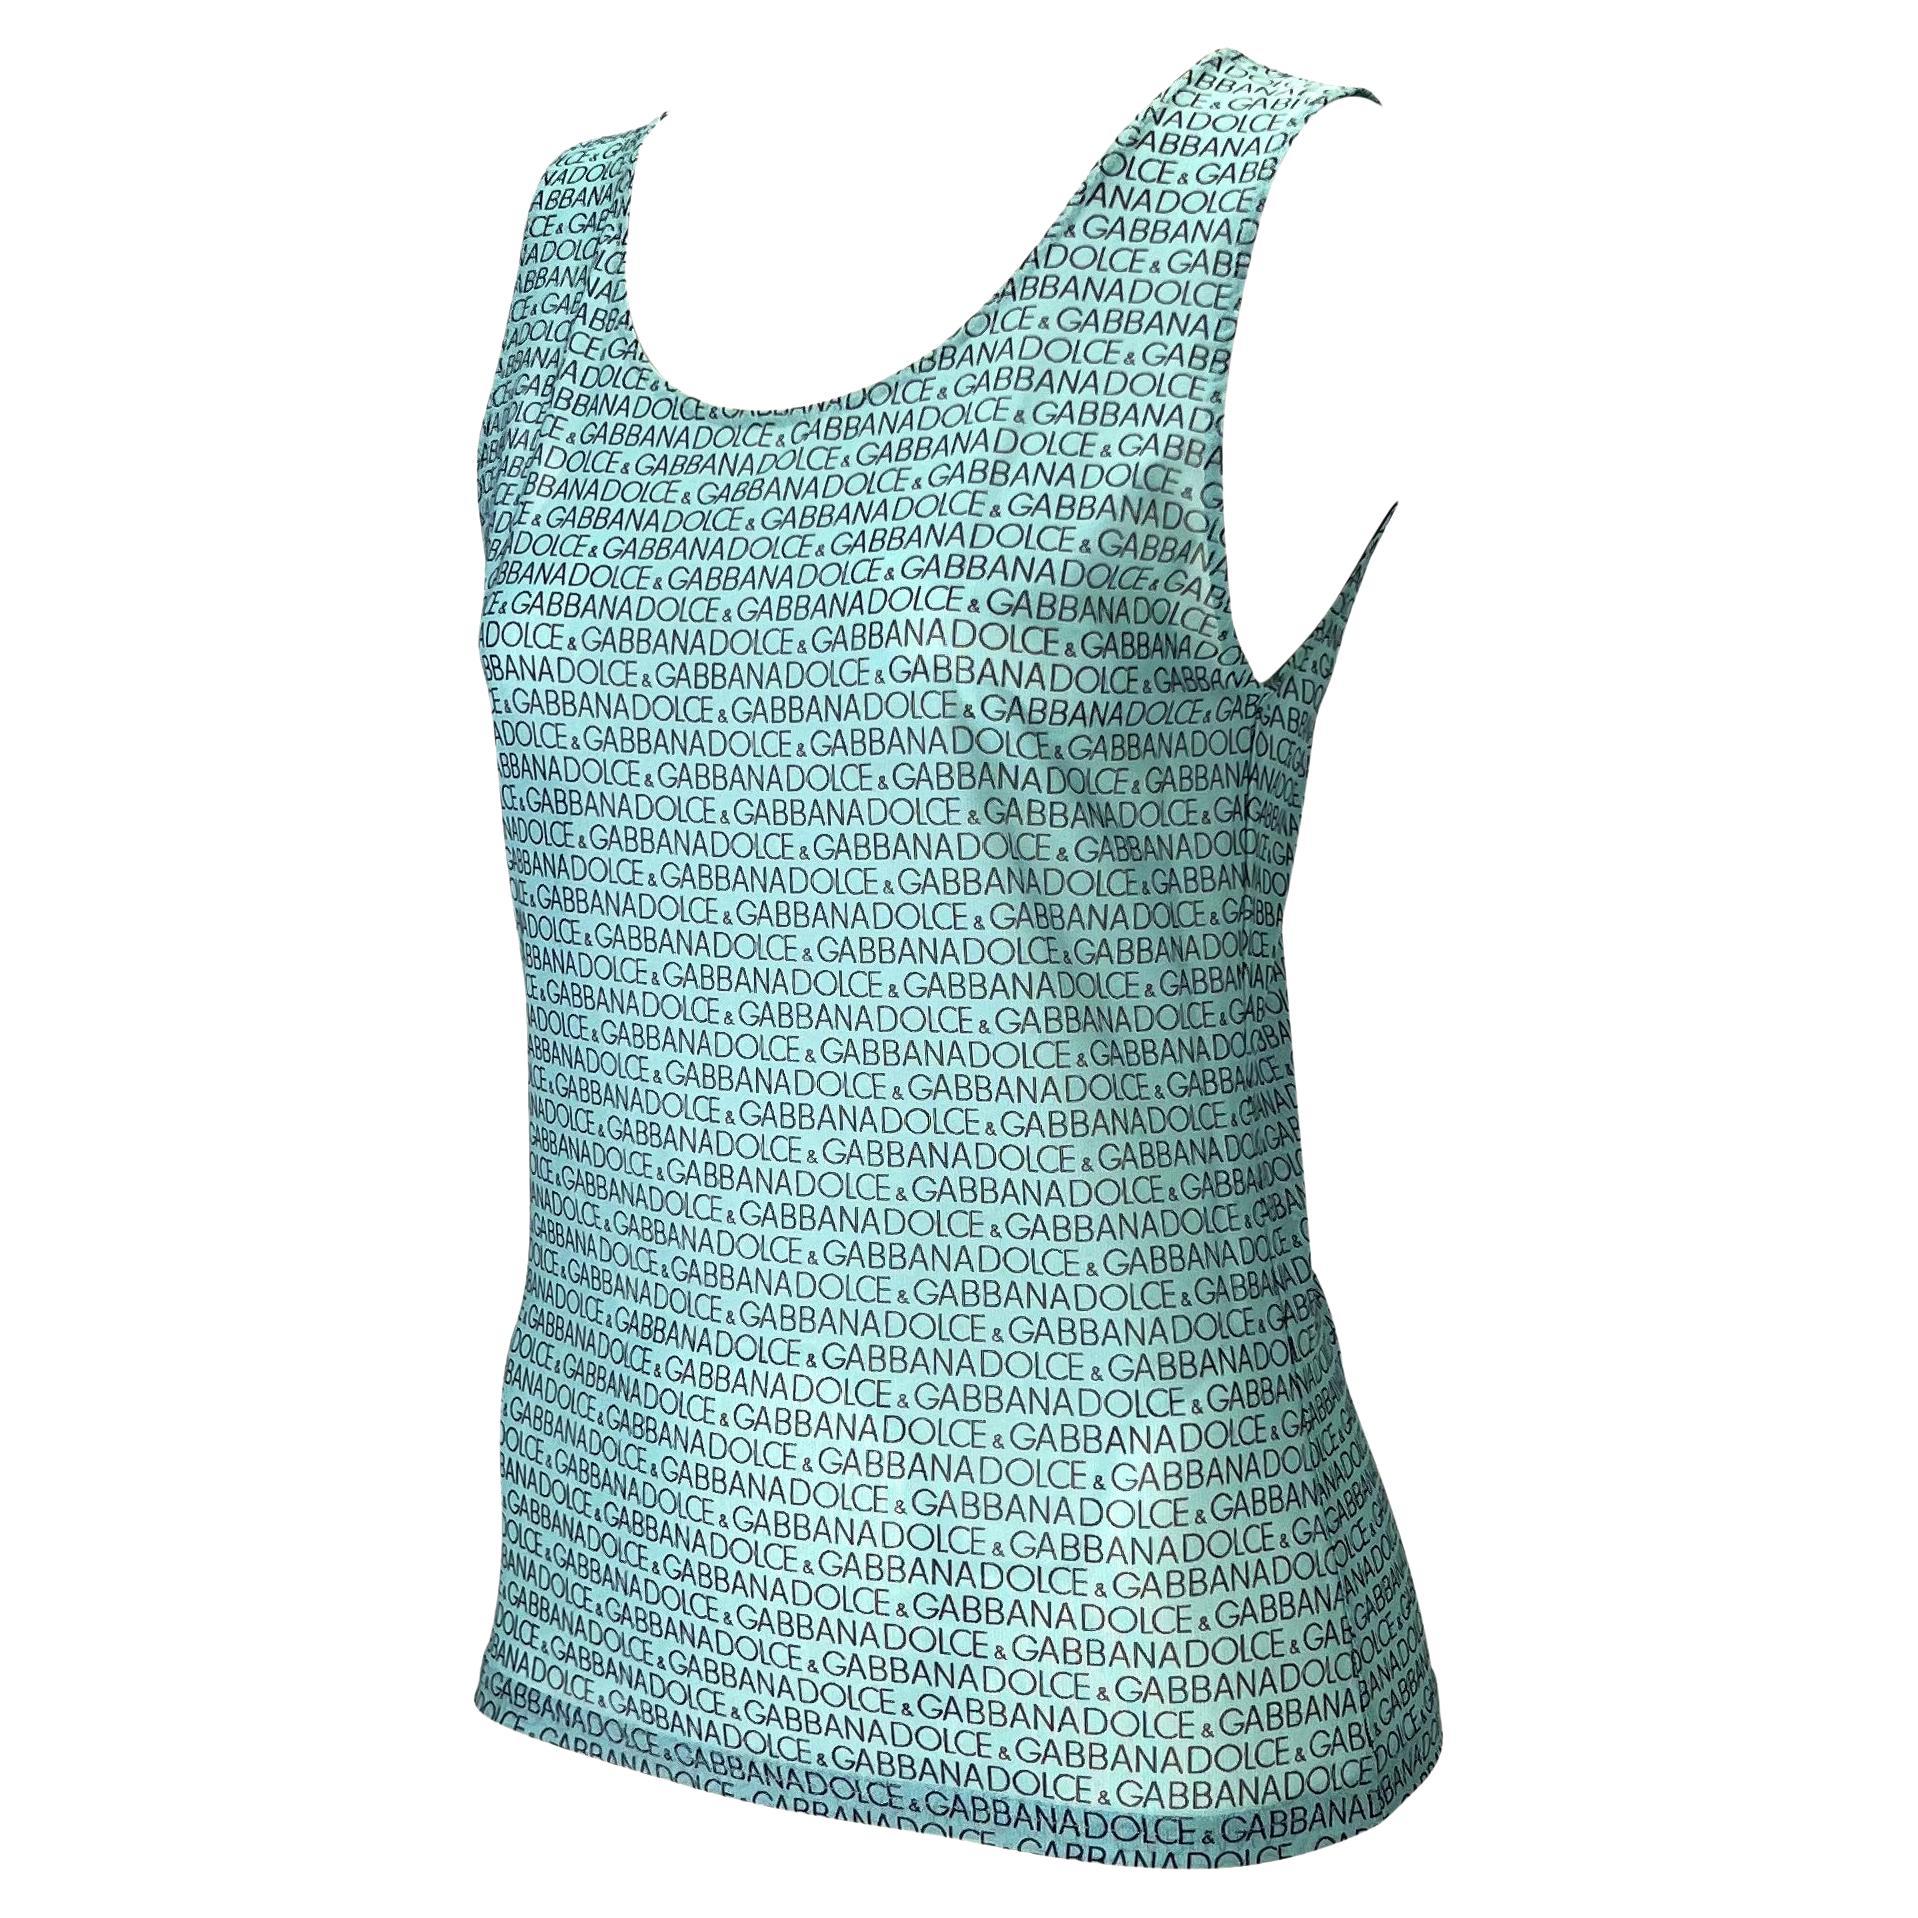 Presenting a sheer stretchy Dolce & Gabbana mare logo print sleeveless blouse from the early 2000s. This teal Y2K piece features the logo print that debuted in the Spring/Summer 1995 season in black and white.

Approximate measurements:
2